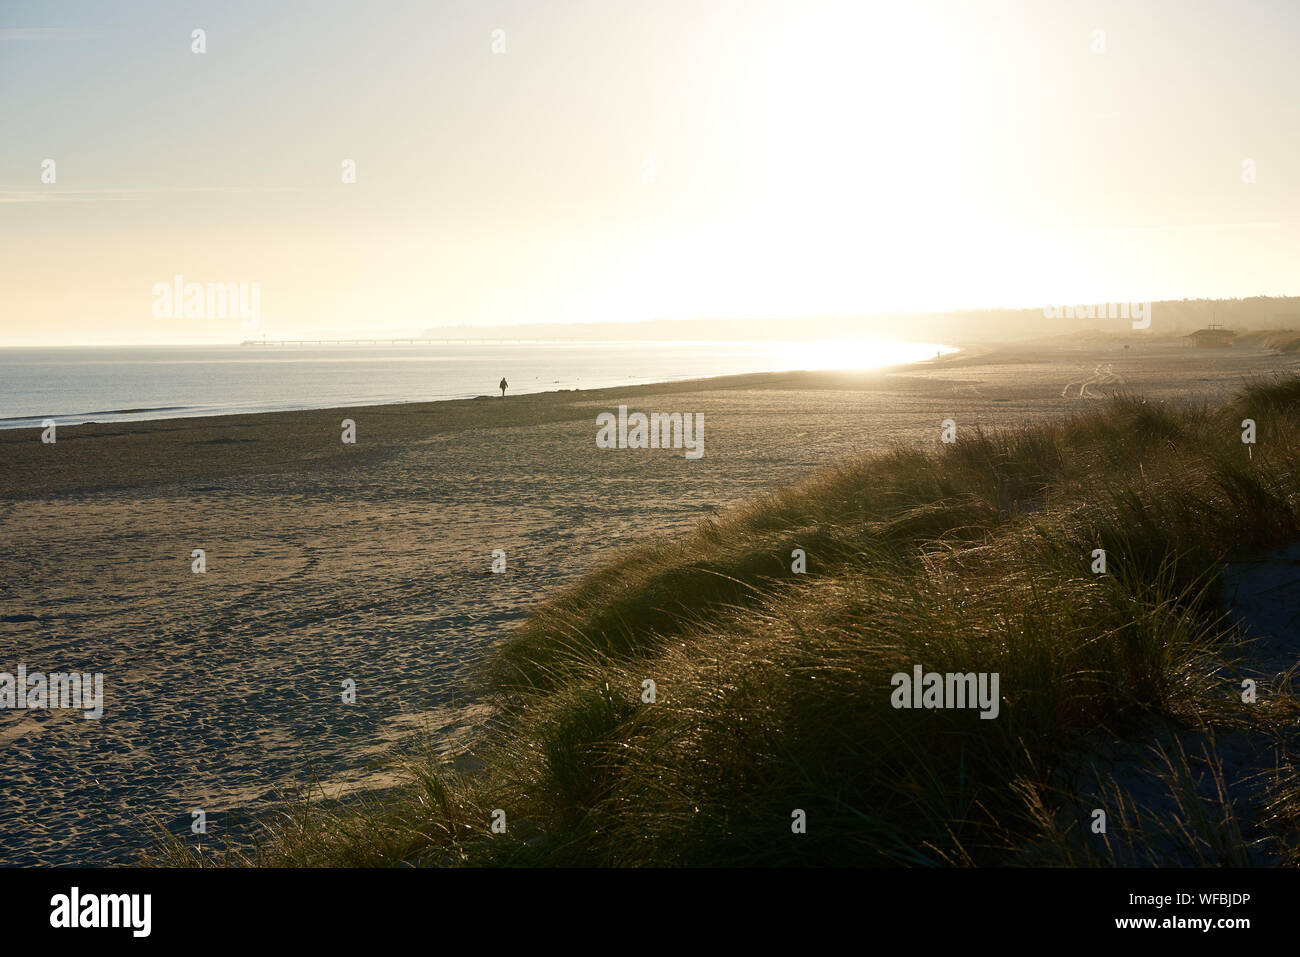 Lonely beach walk on a long sandy beach in the warm backlight of the morning autumn light, with a dune with dense marram grass. Stock Photo